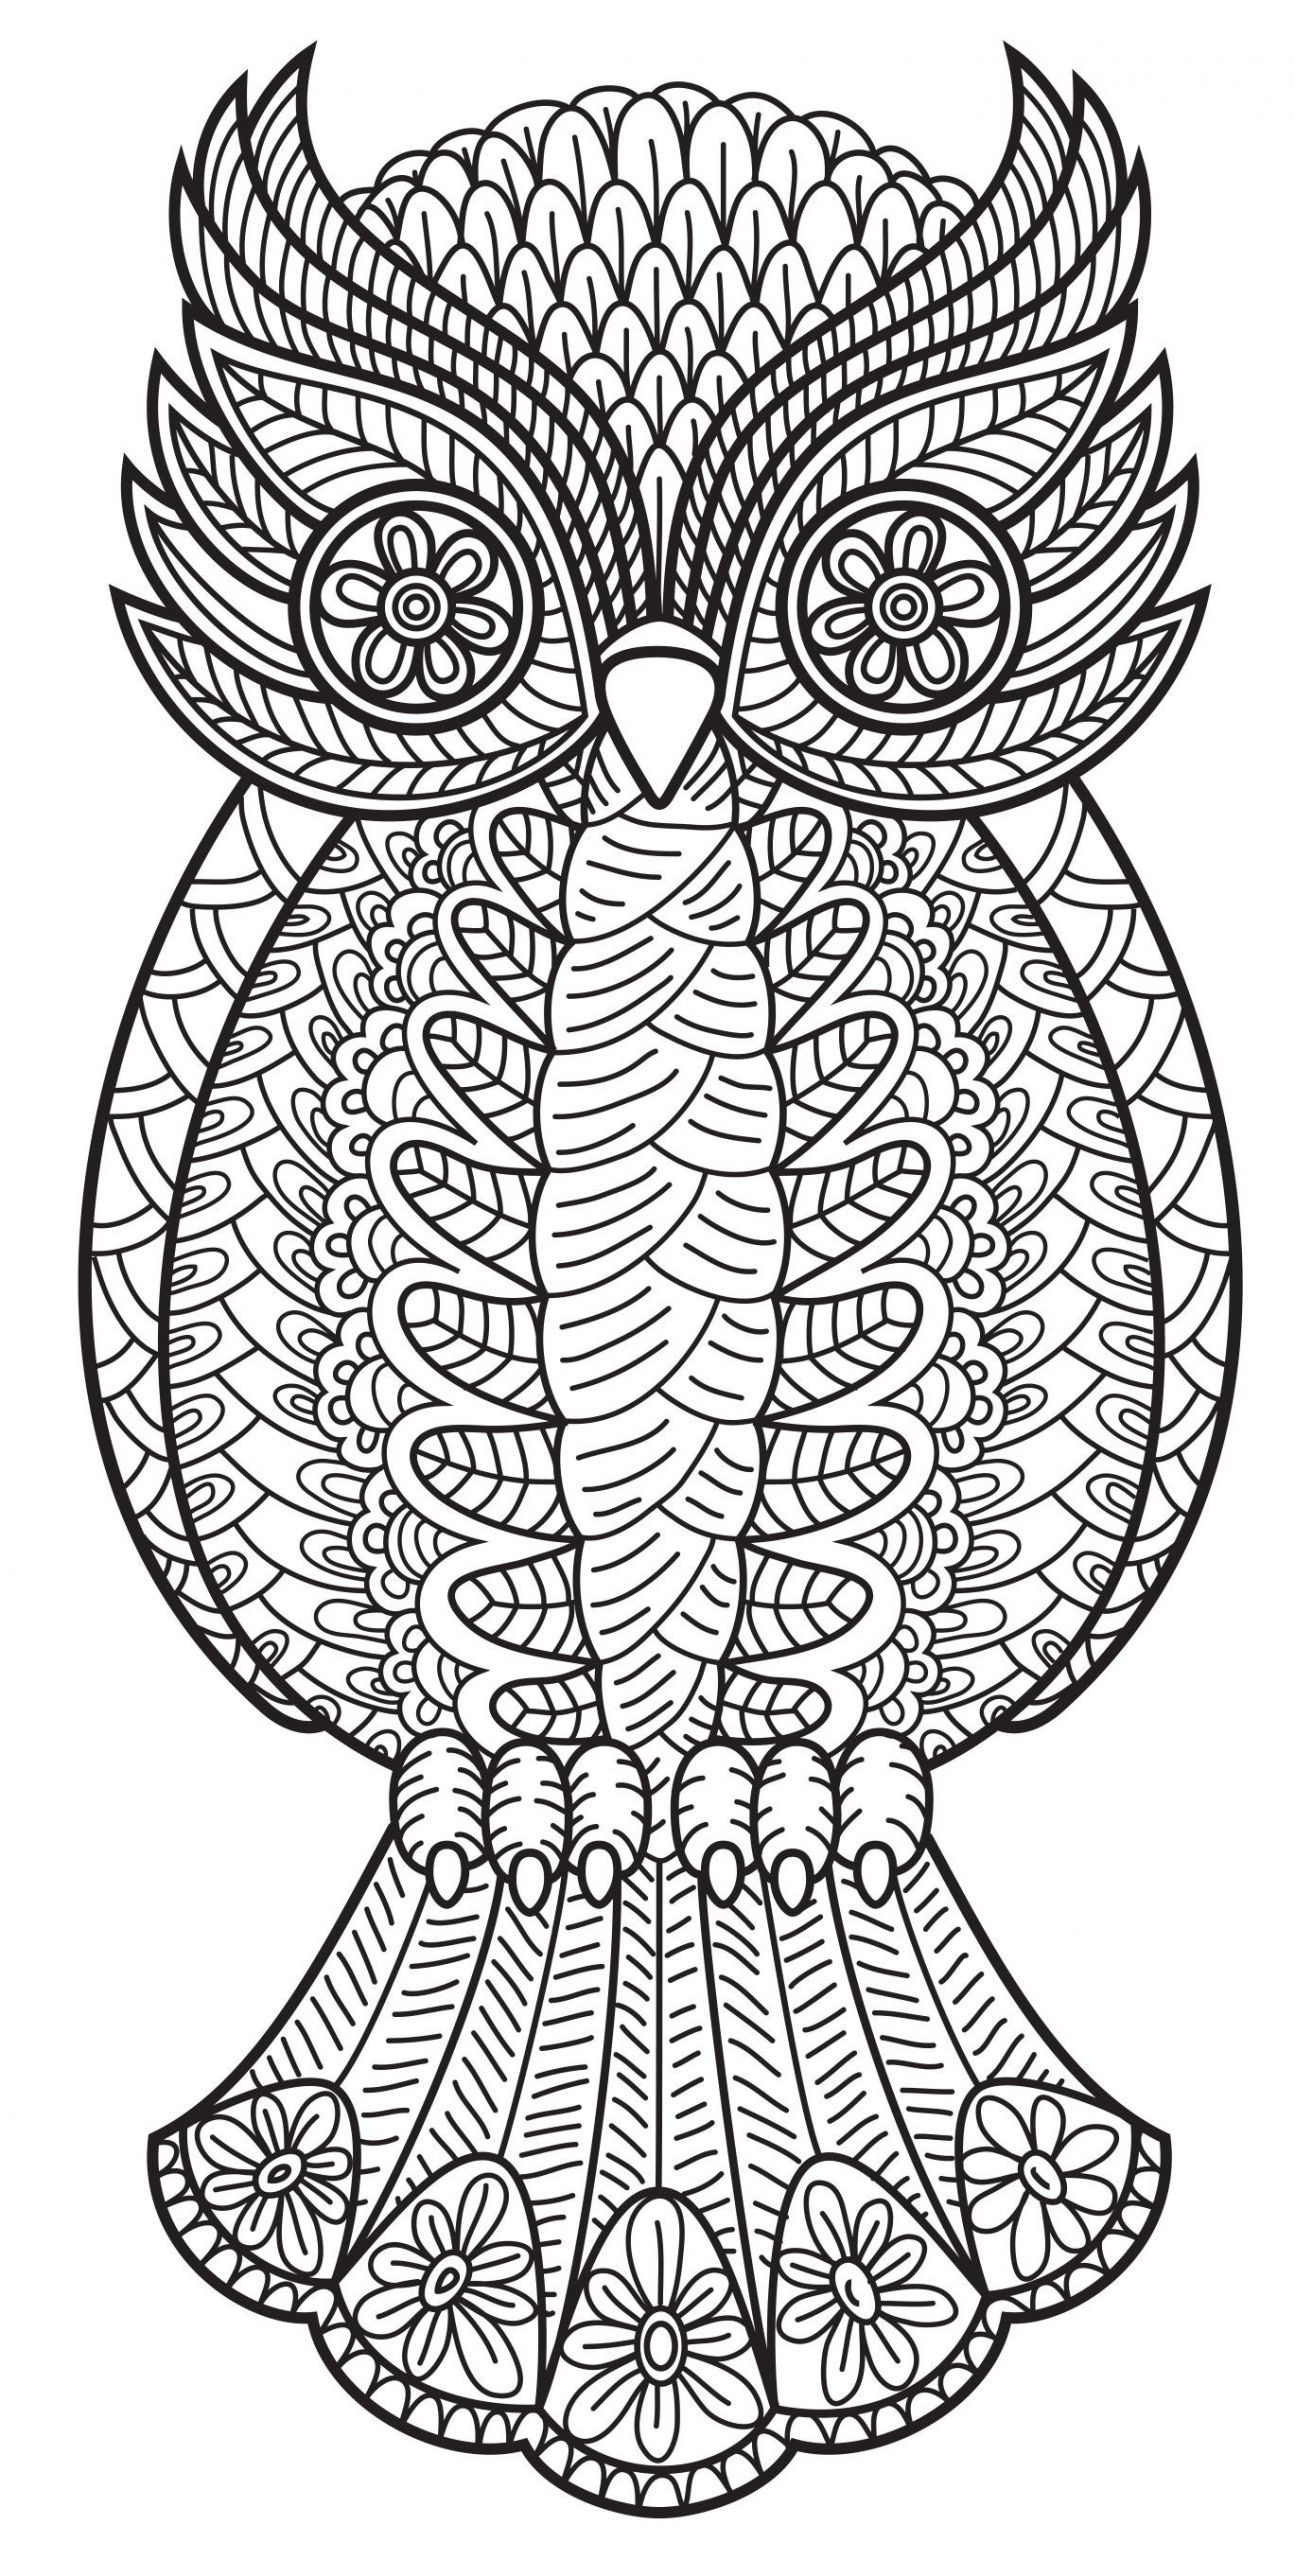 Adult Coloring Pages Animal Patterns
 An owl from Patterns Coloring Book Vol 3 Coloring Pages Owls